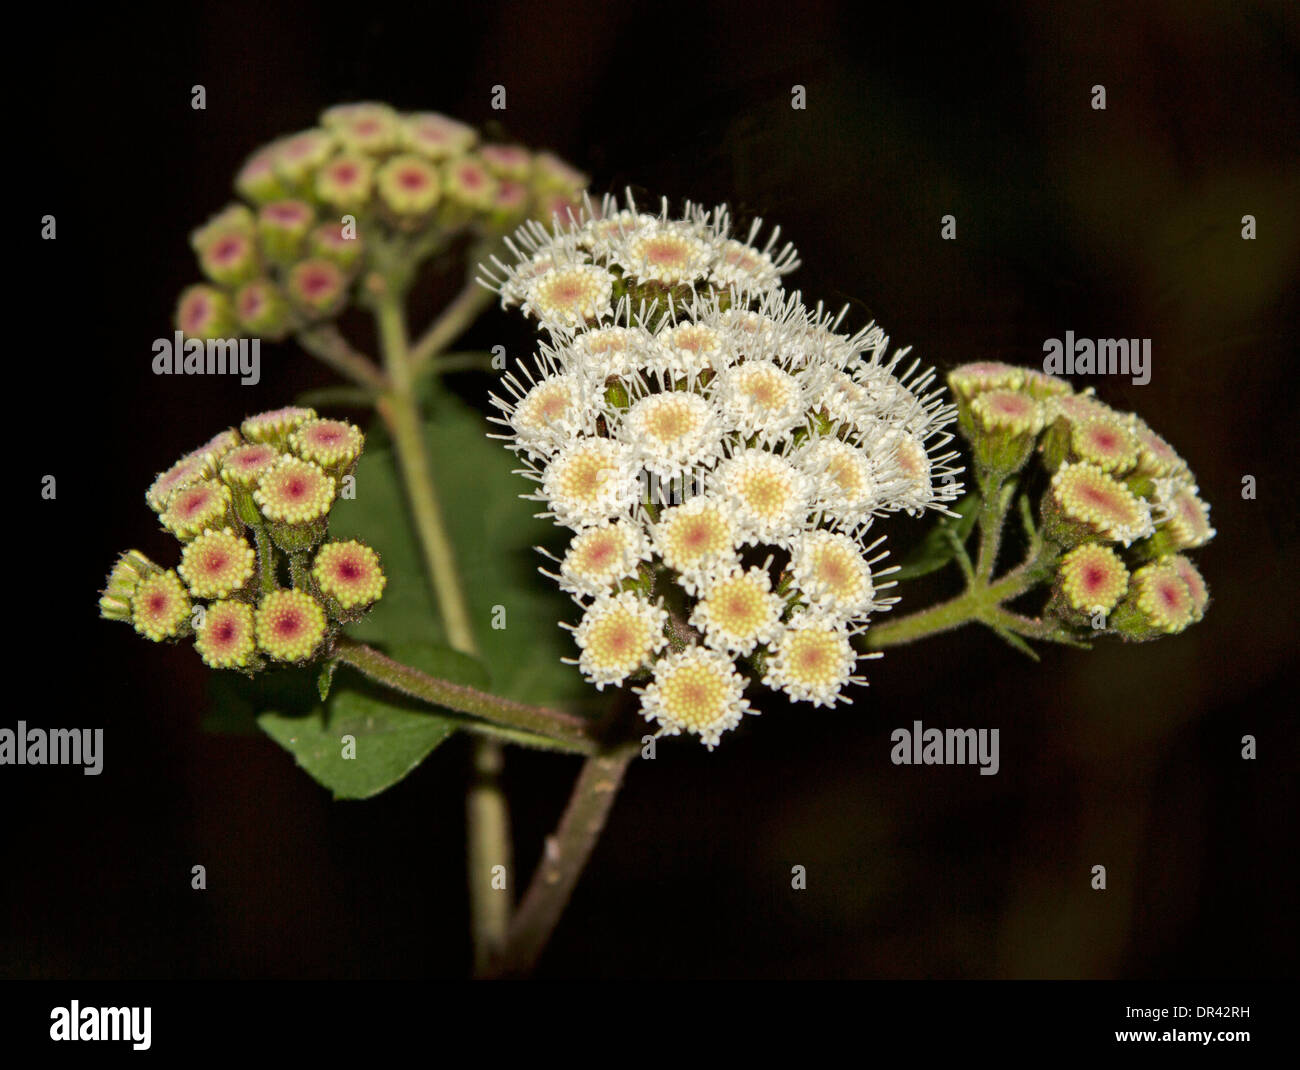 Cluster of flowers of Crofton weed, Ageratina adenophora, against dark background - in Nowendoc National Park NSW Australia Stock Photo